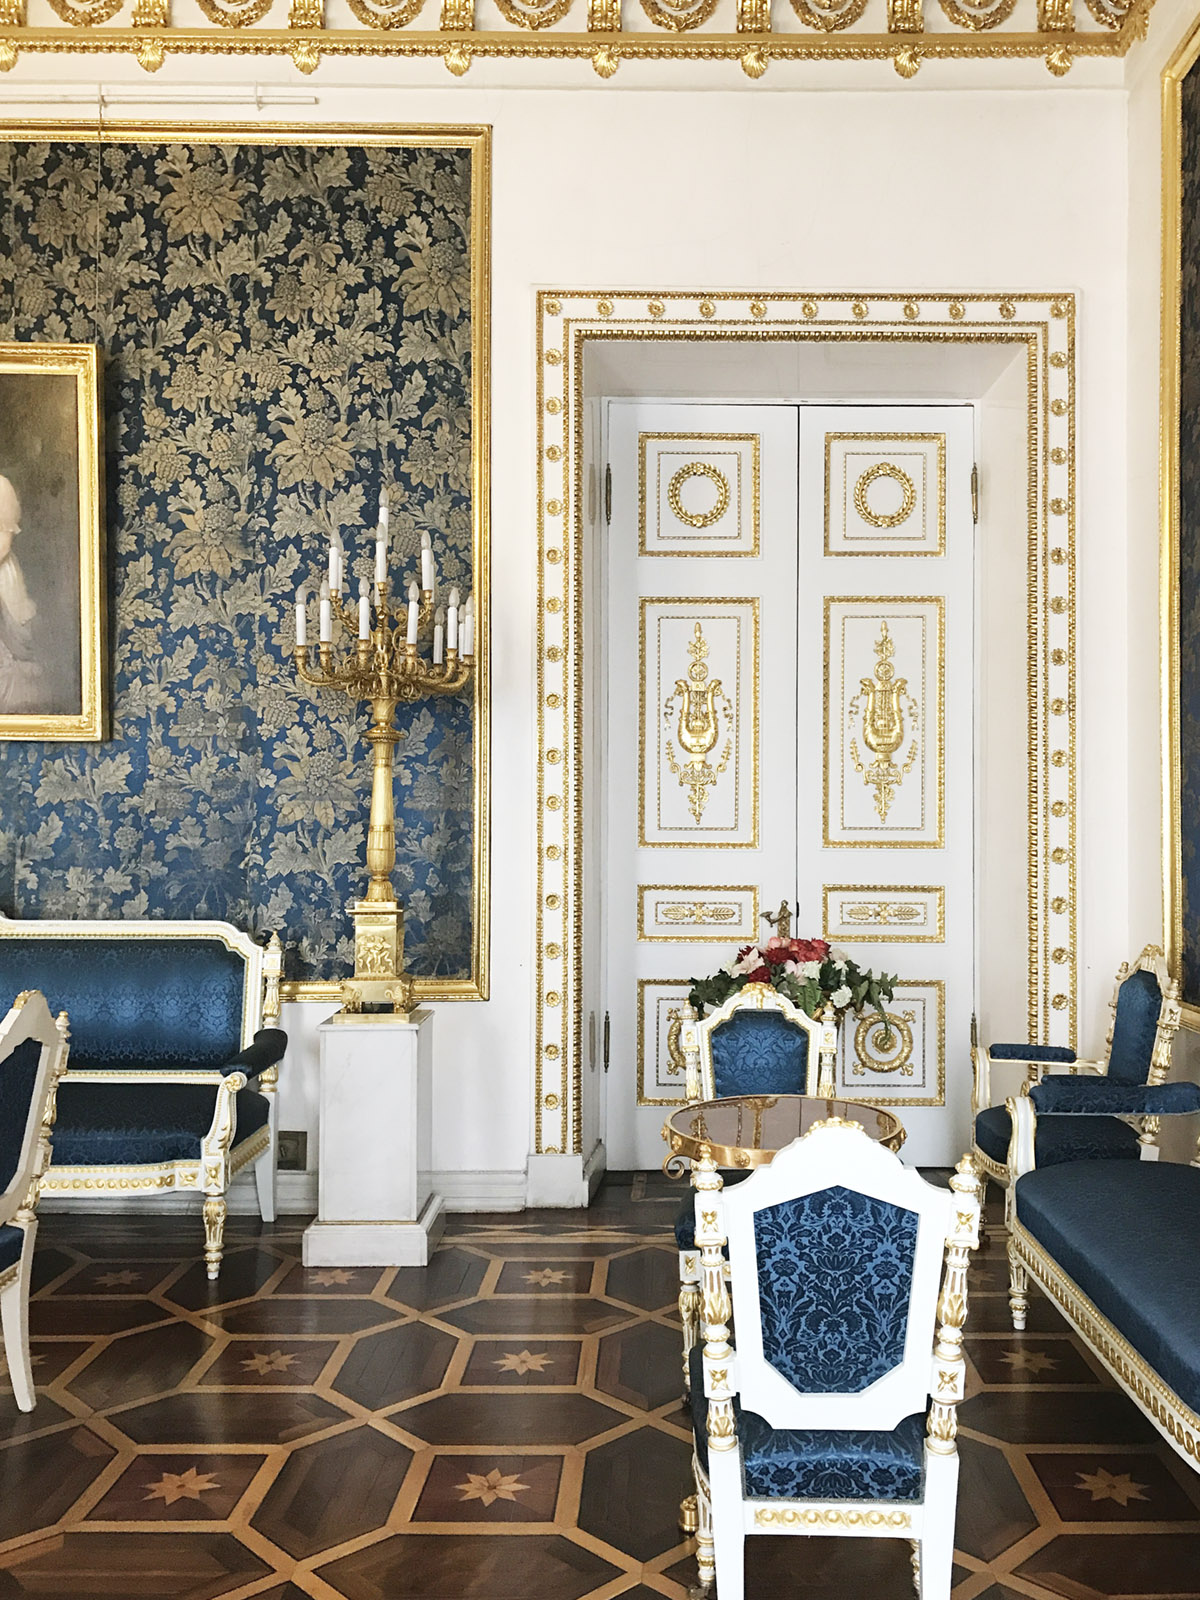 the blue room at Yusupov Palace | travel guide to the museums and palaces of st. petersburg on coco kelley